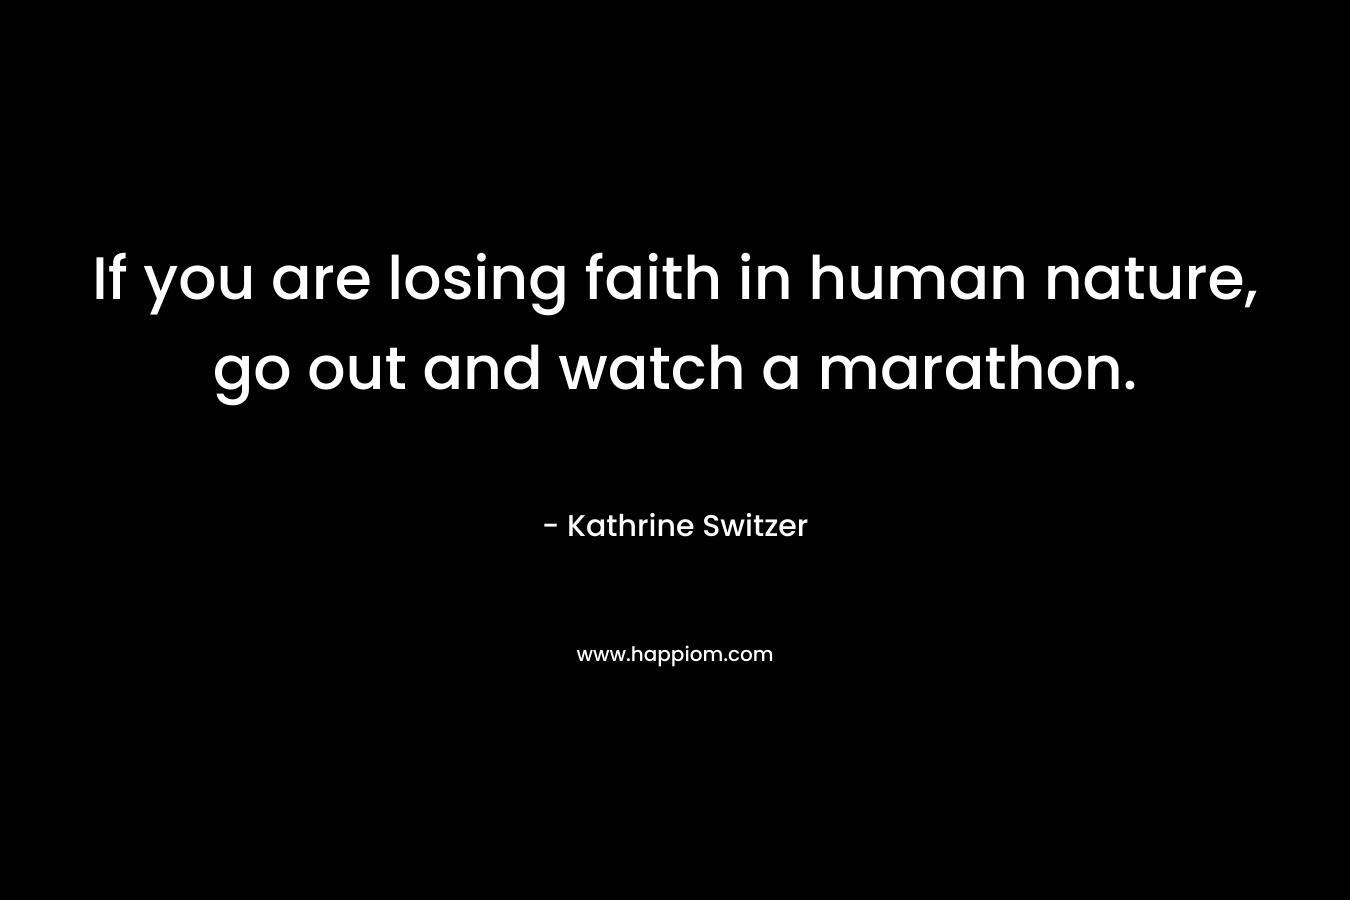 If you are losing faith in human nature, go out and watch a marathon. – Kathrine Switzer